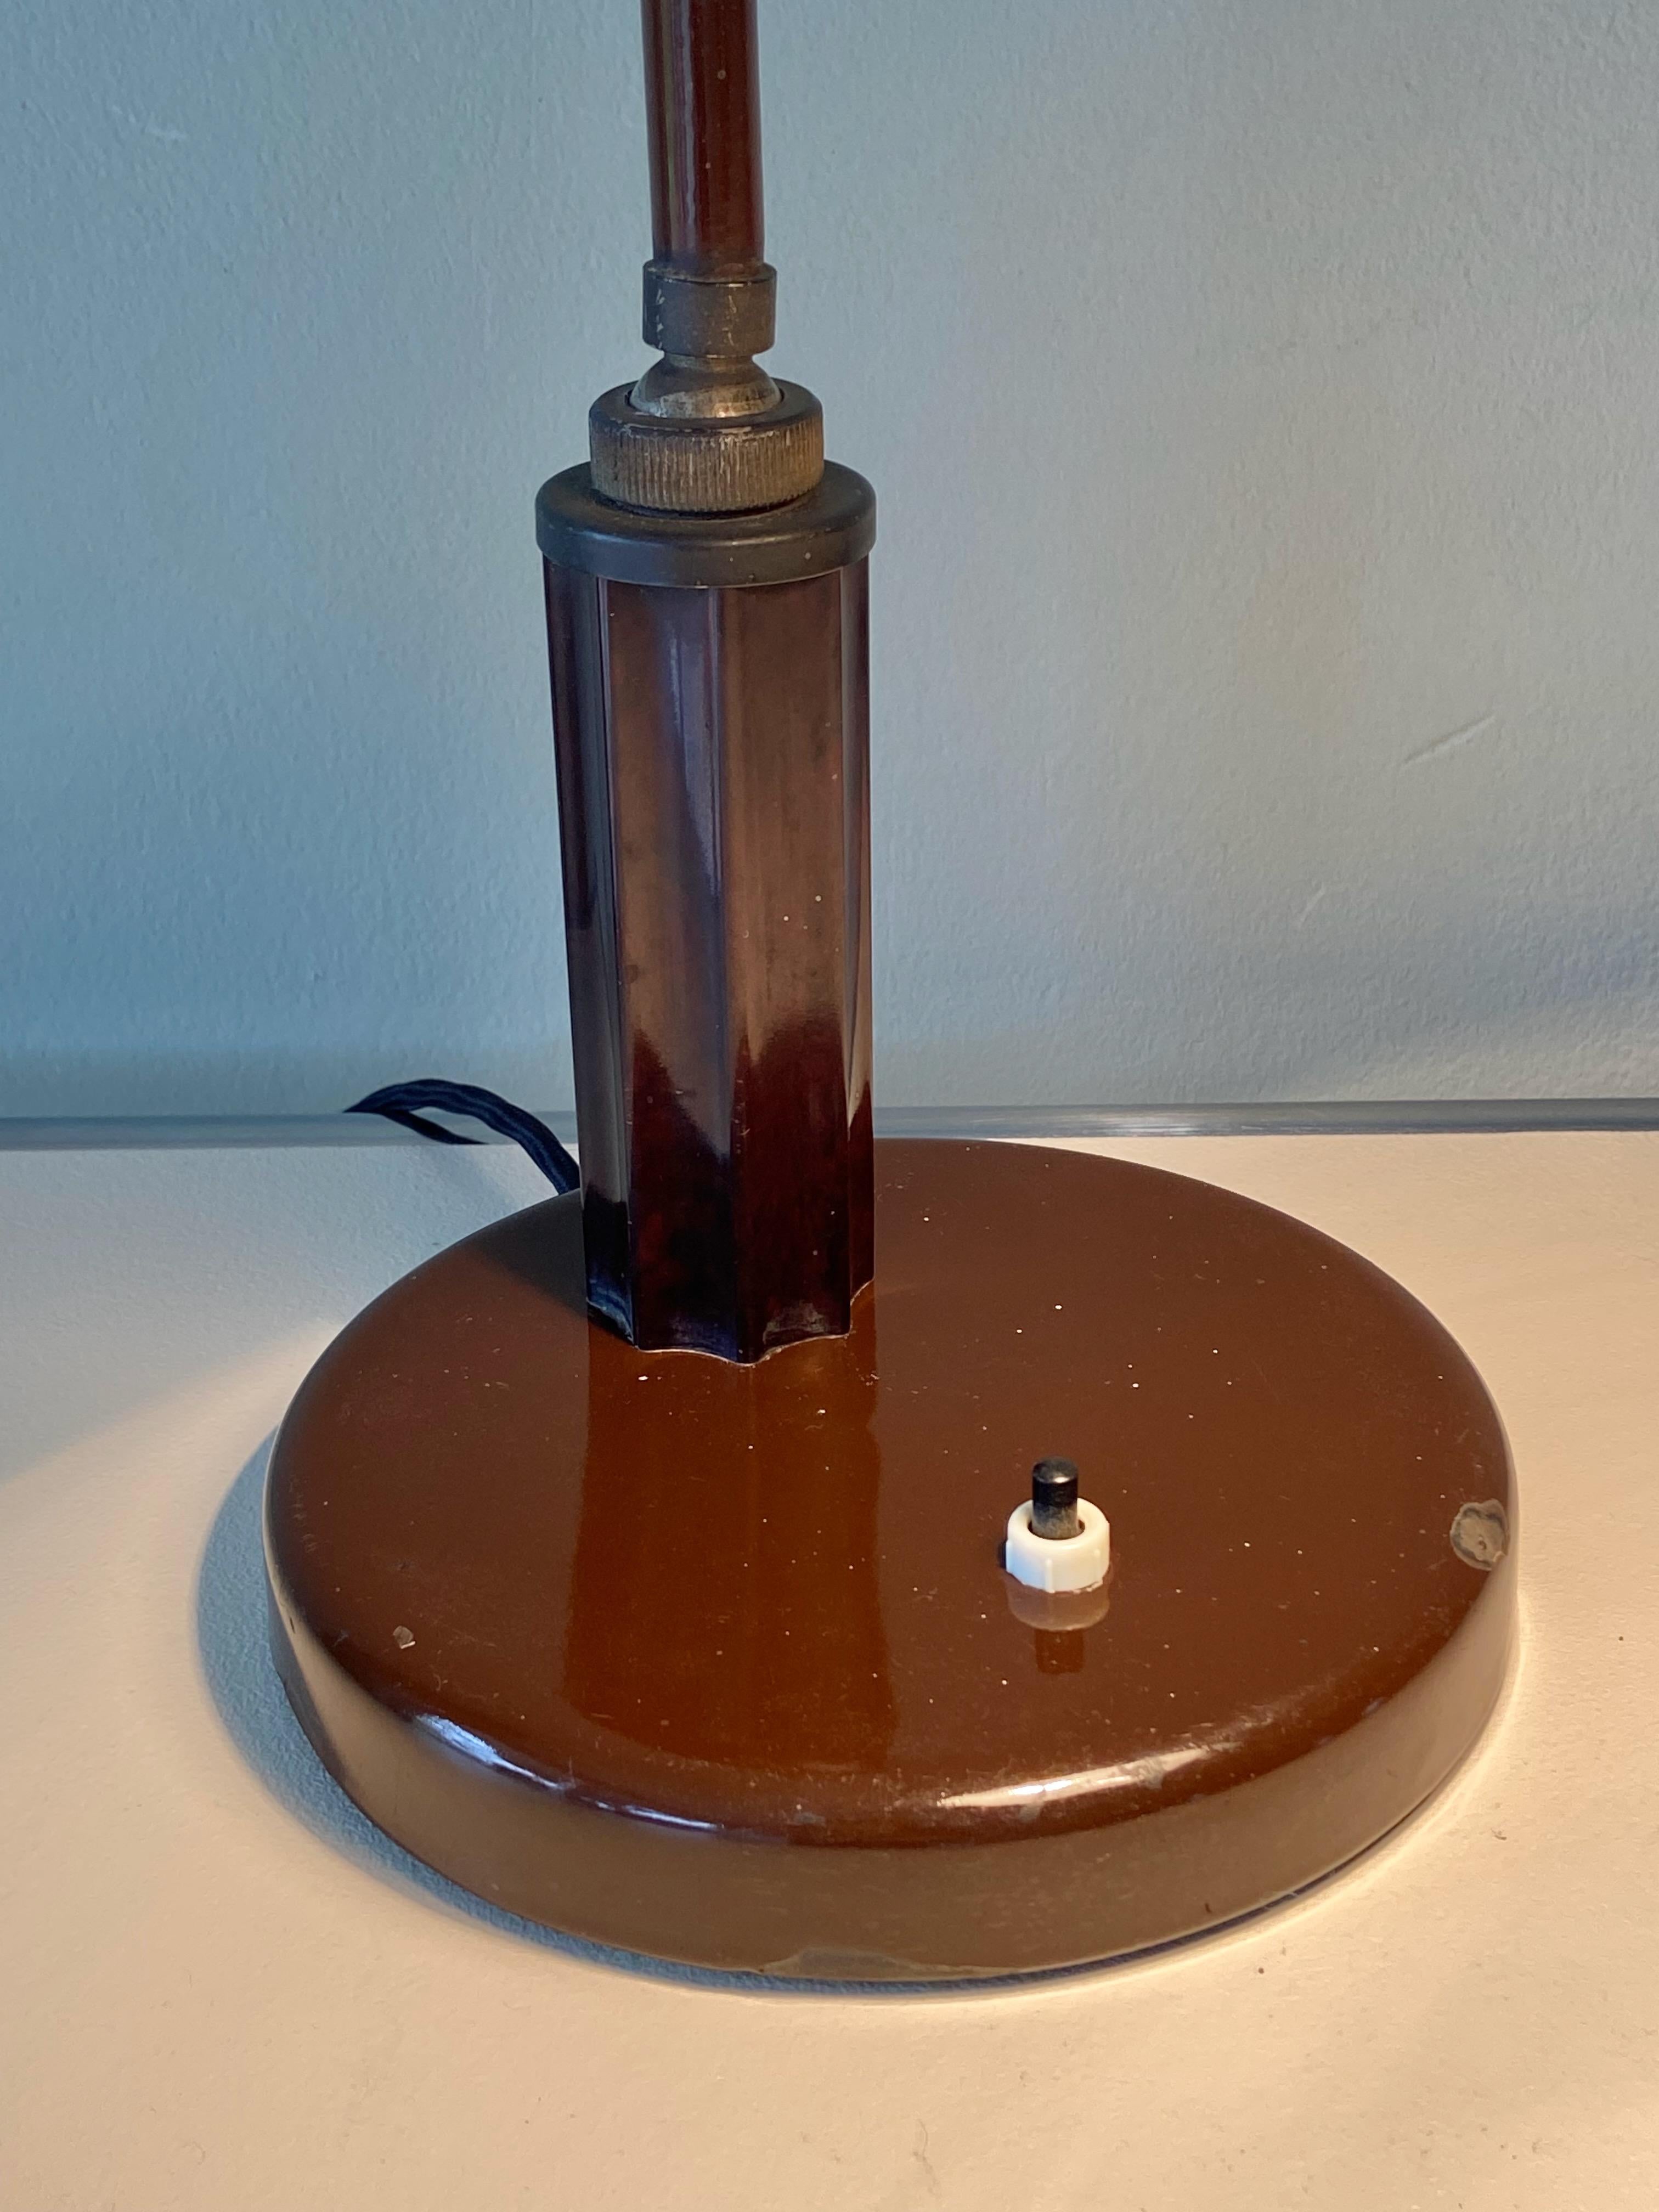 Bauhaus Molitor Grapholux Lamp Brown Enamel and Bakelite Stick by Christian Dell 1930s For Sale